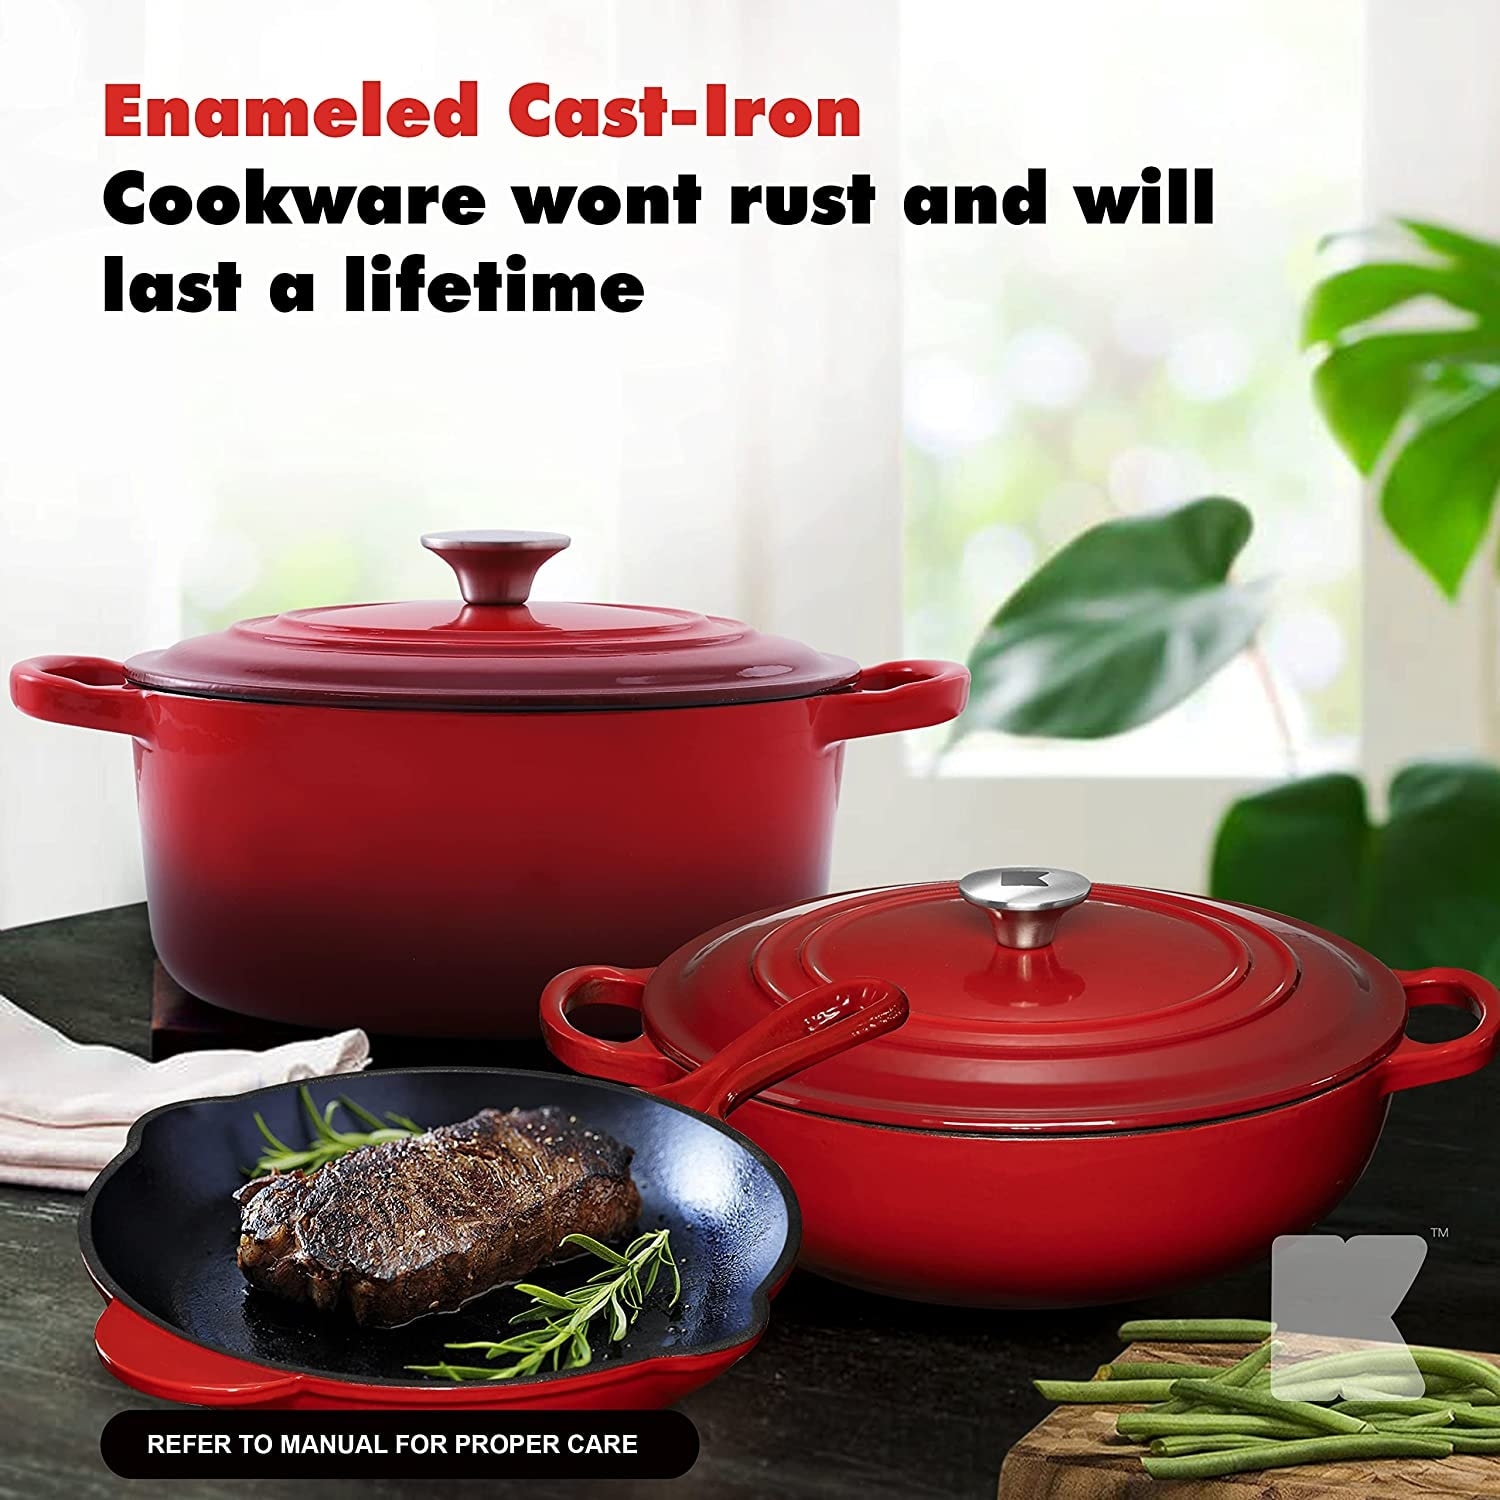 https://ak1.ostkcdn.com/images/products/is/images/direct/6d03f2329281fef1226985f7d8b6d64675a9a158/Enameled-Cast-Iron-Cookware-Set---5-Pieces-Solid-Colored-Braiser-Dish%2C-Fry-Pan%3B-Dutch-Oven-Pot-with-Lids.jpg